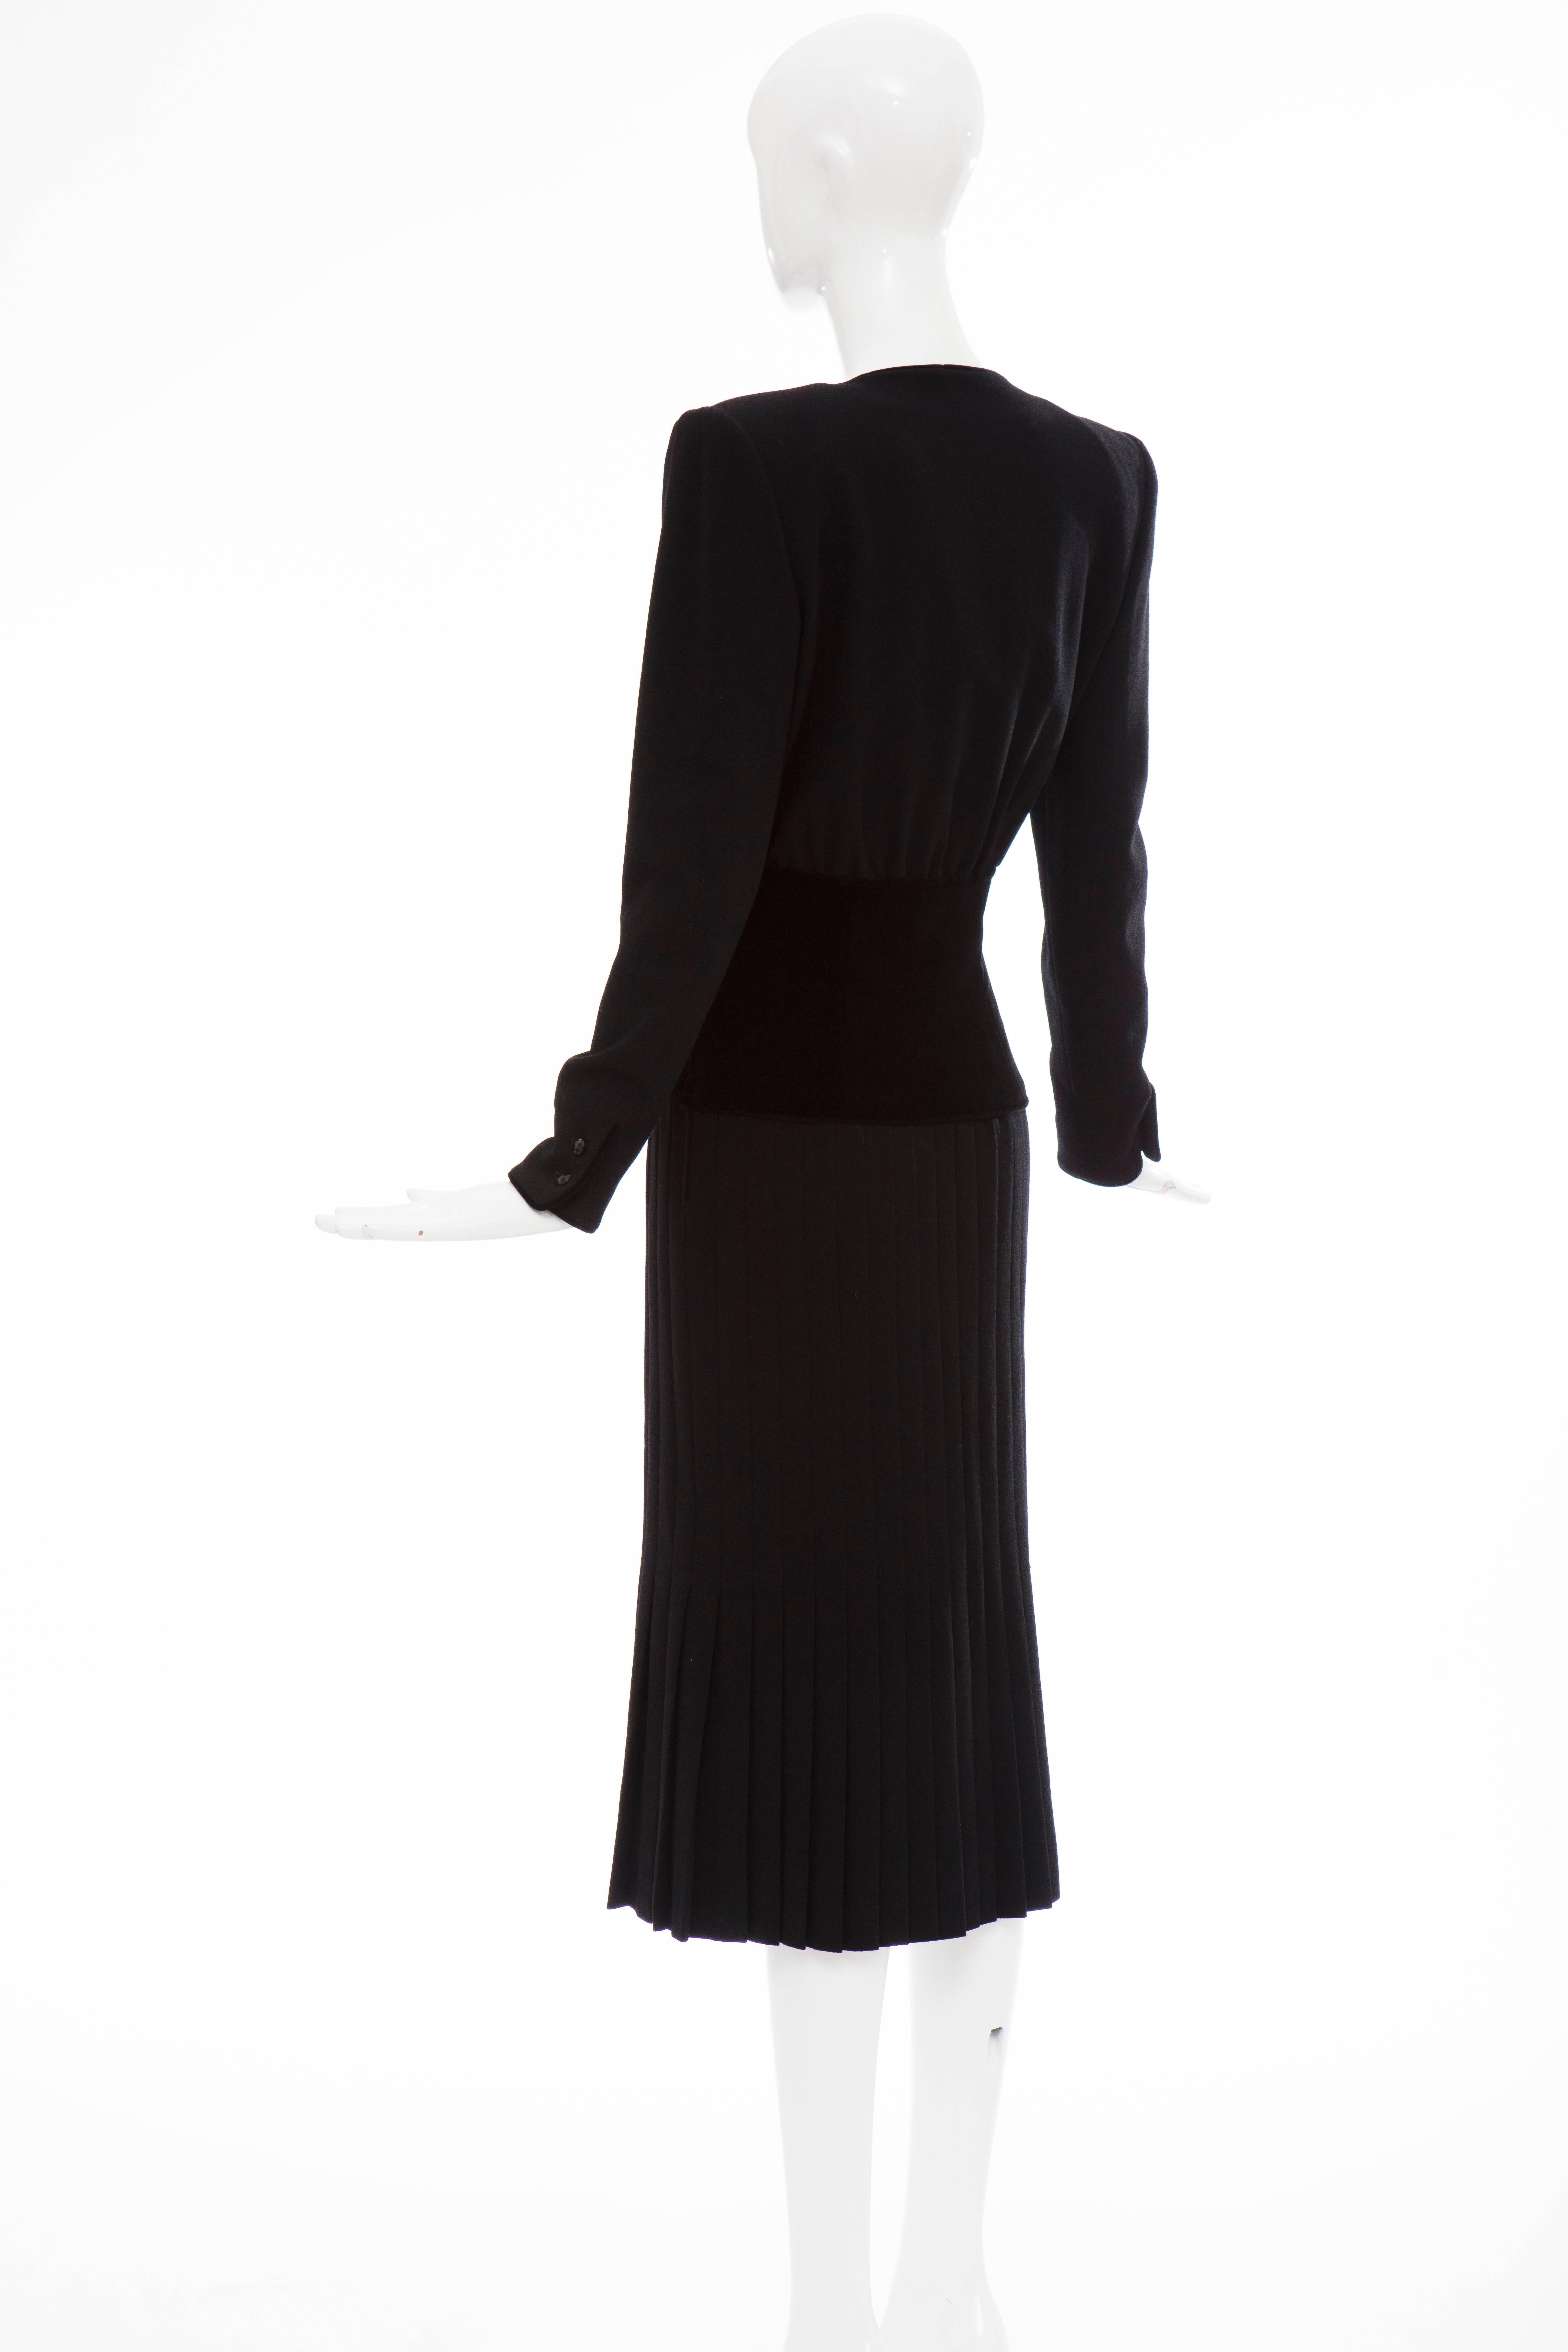 Valentino Black Wool Crepe And Velvet Evening Dress, Circa 1980's For Sale 3